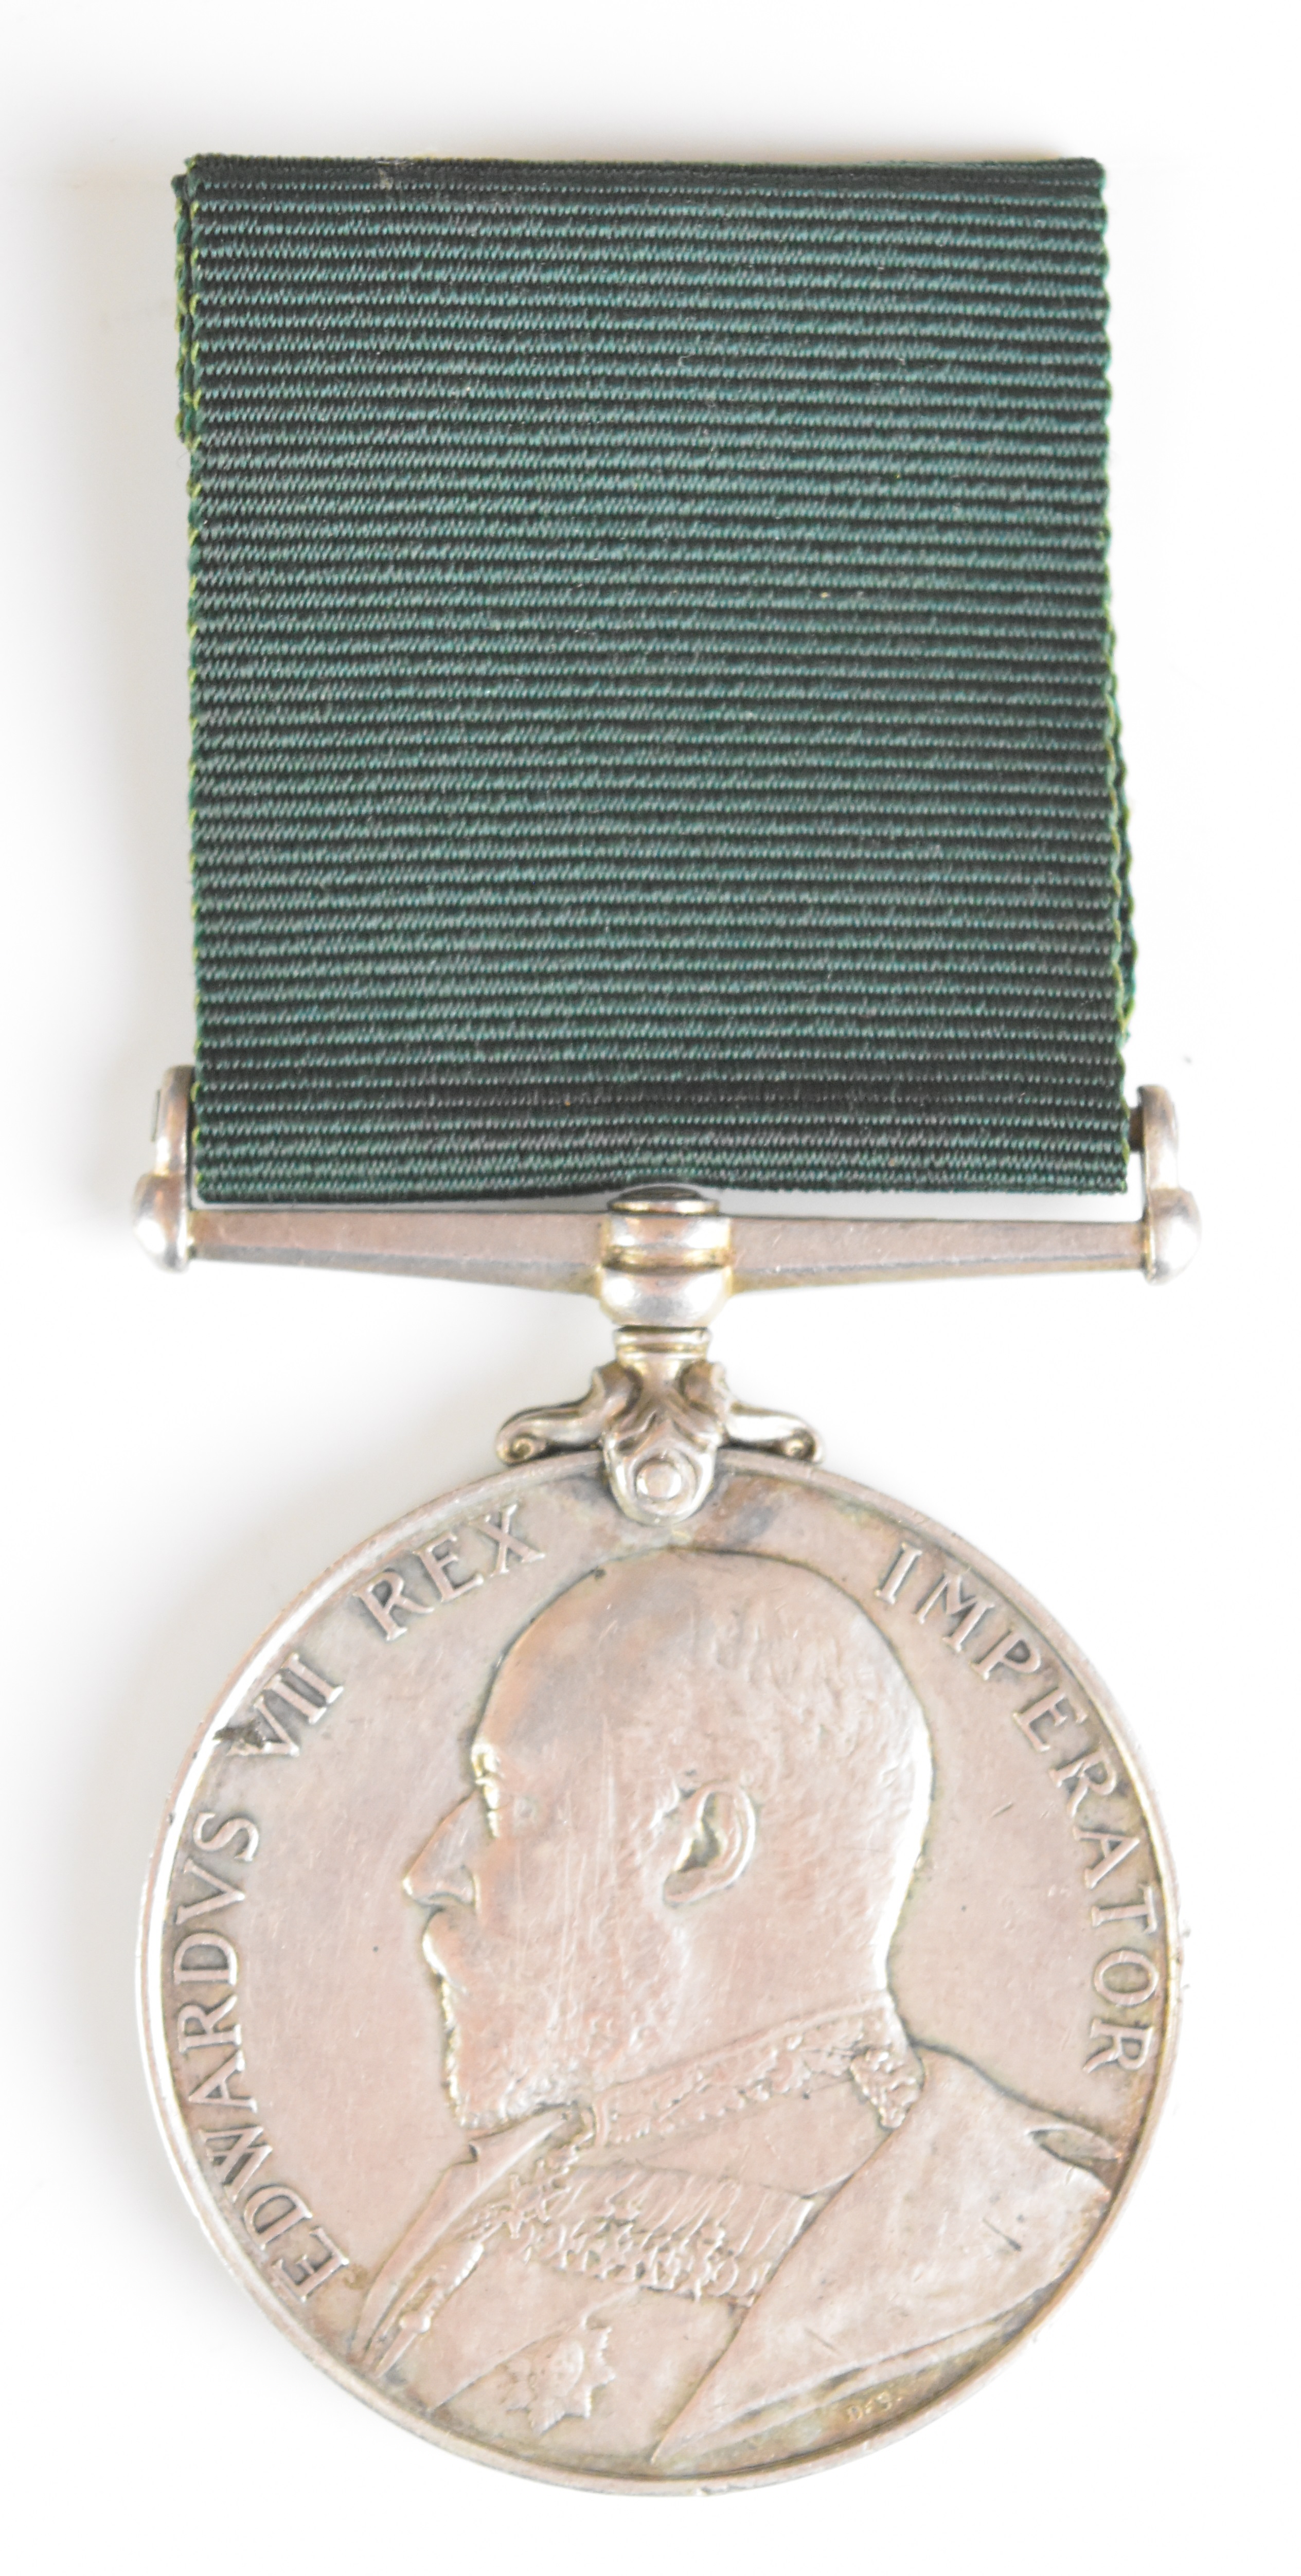 British Army Edward VII Volunteer Long Service Medal named to 3438 Pte D Chadwick, 1st Volunteer